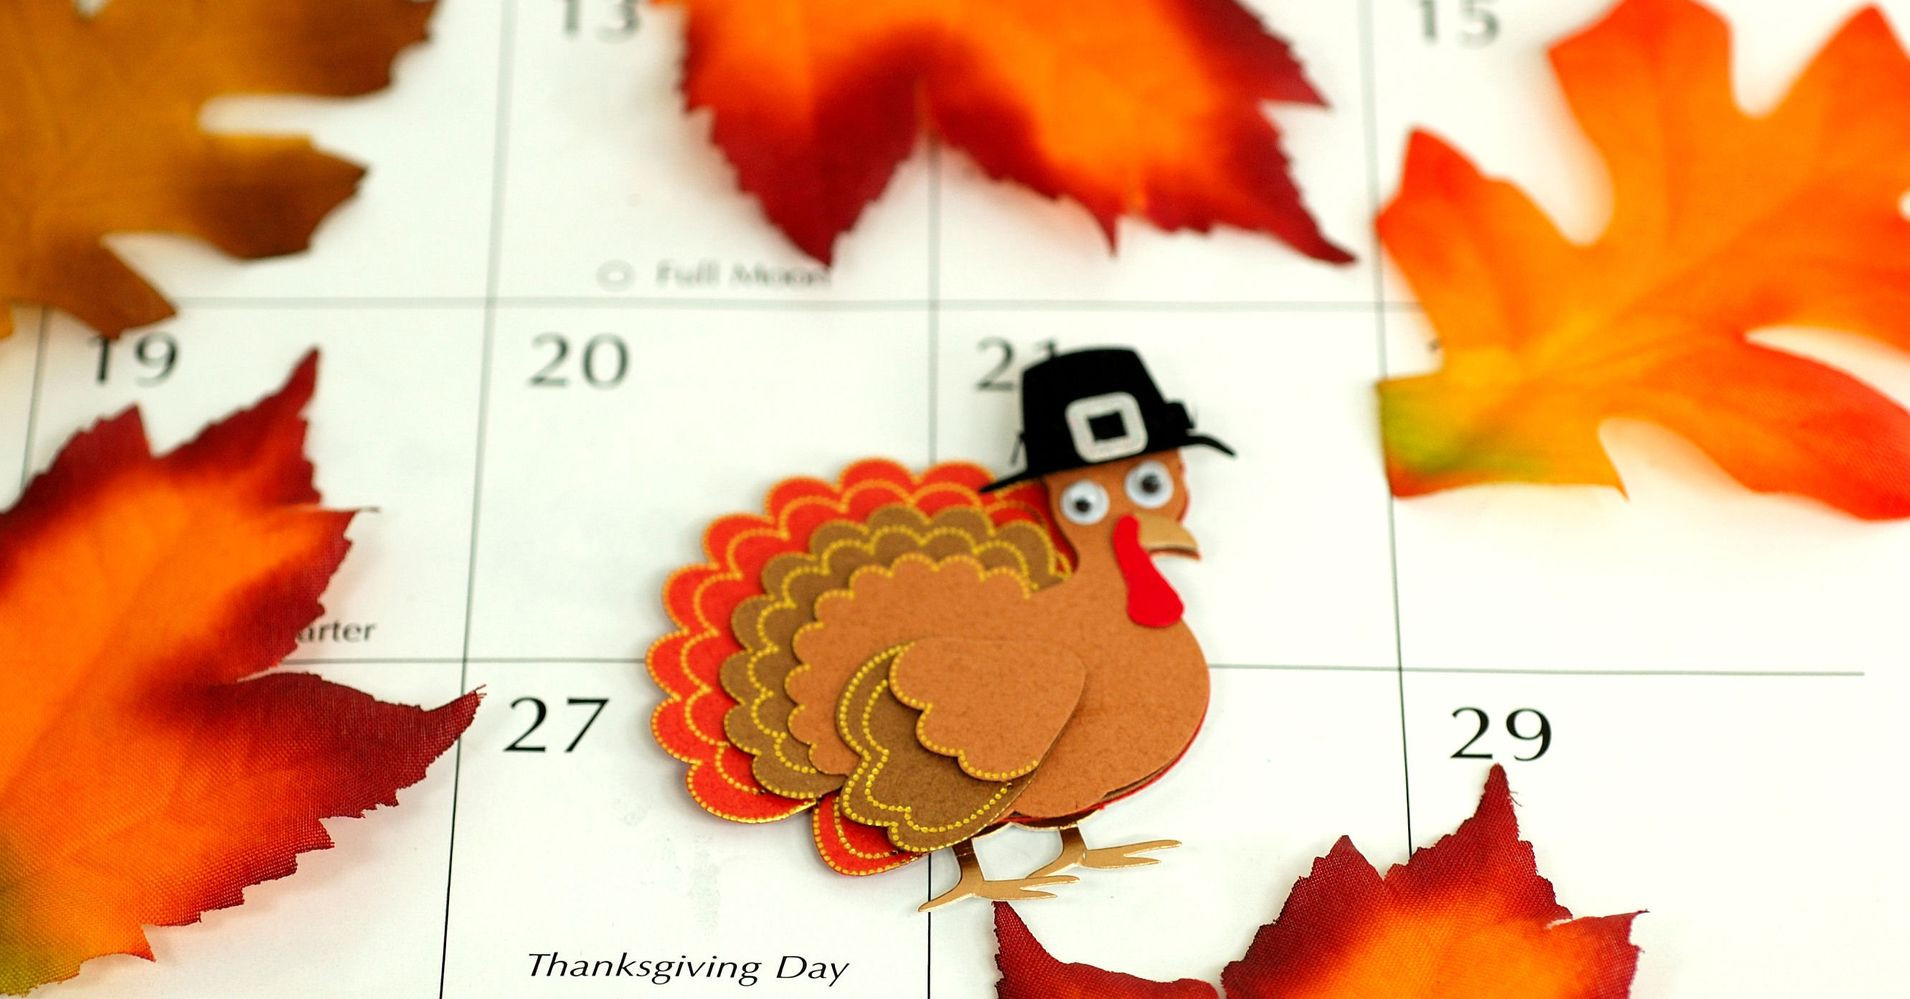 Buy Thanksgiving Turkey
 When To Buy Your Turkey Order It Ahead For Thanksgiving